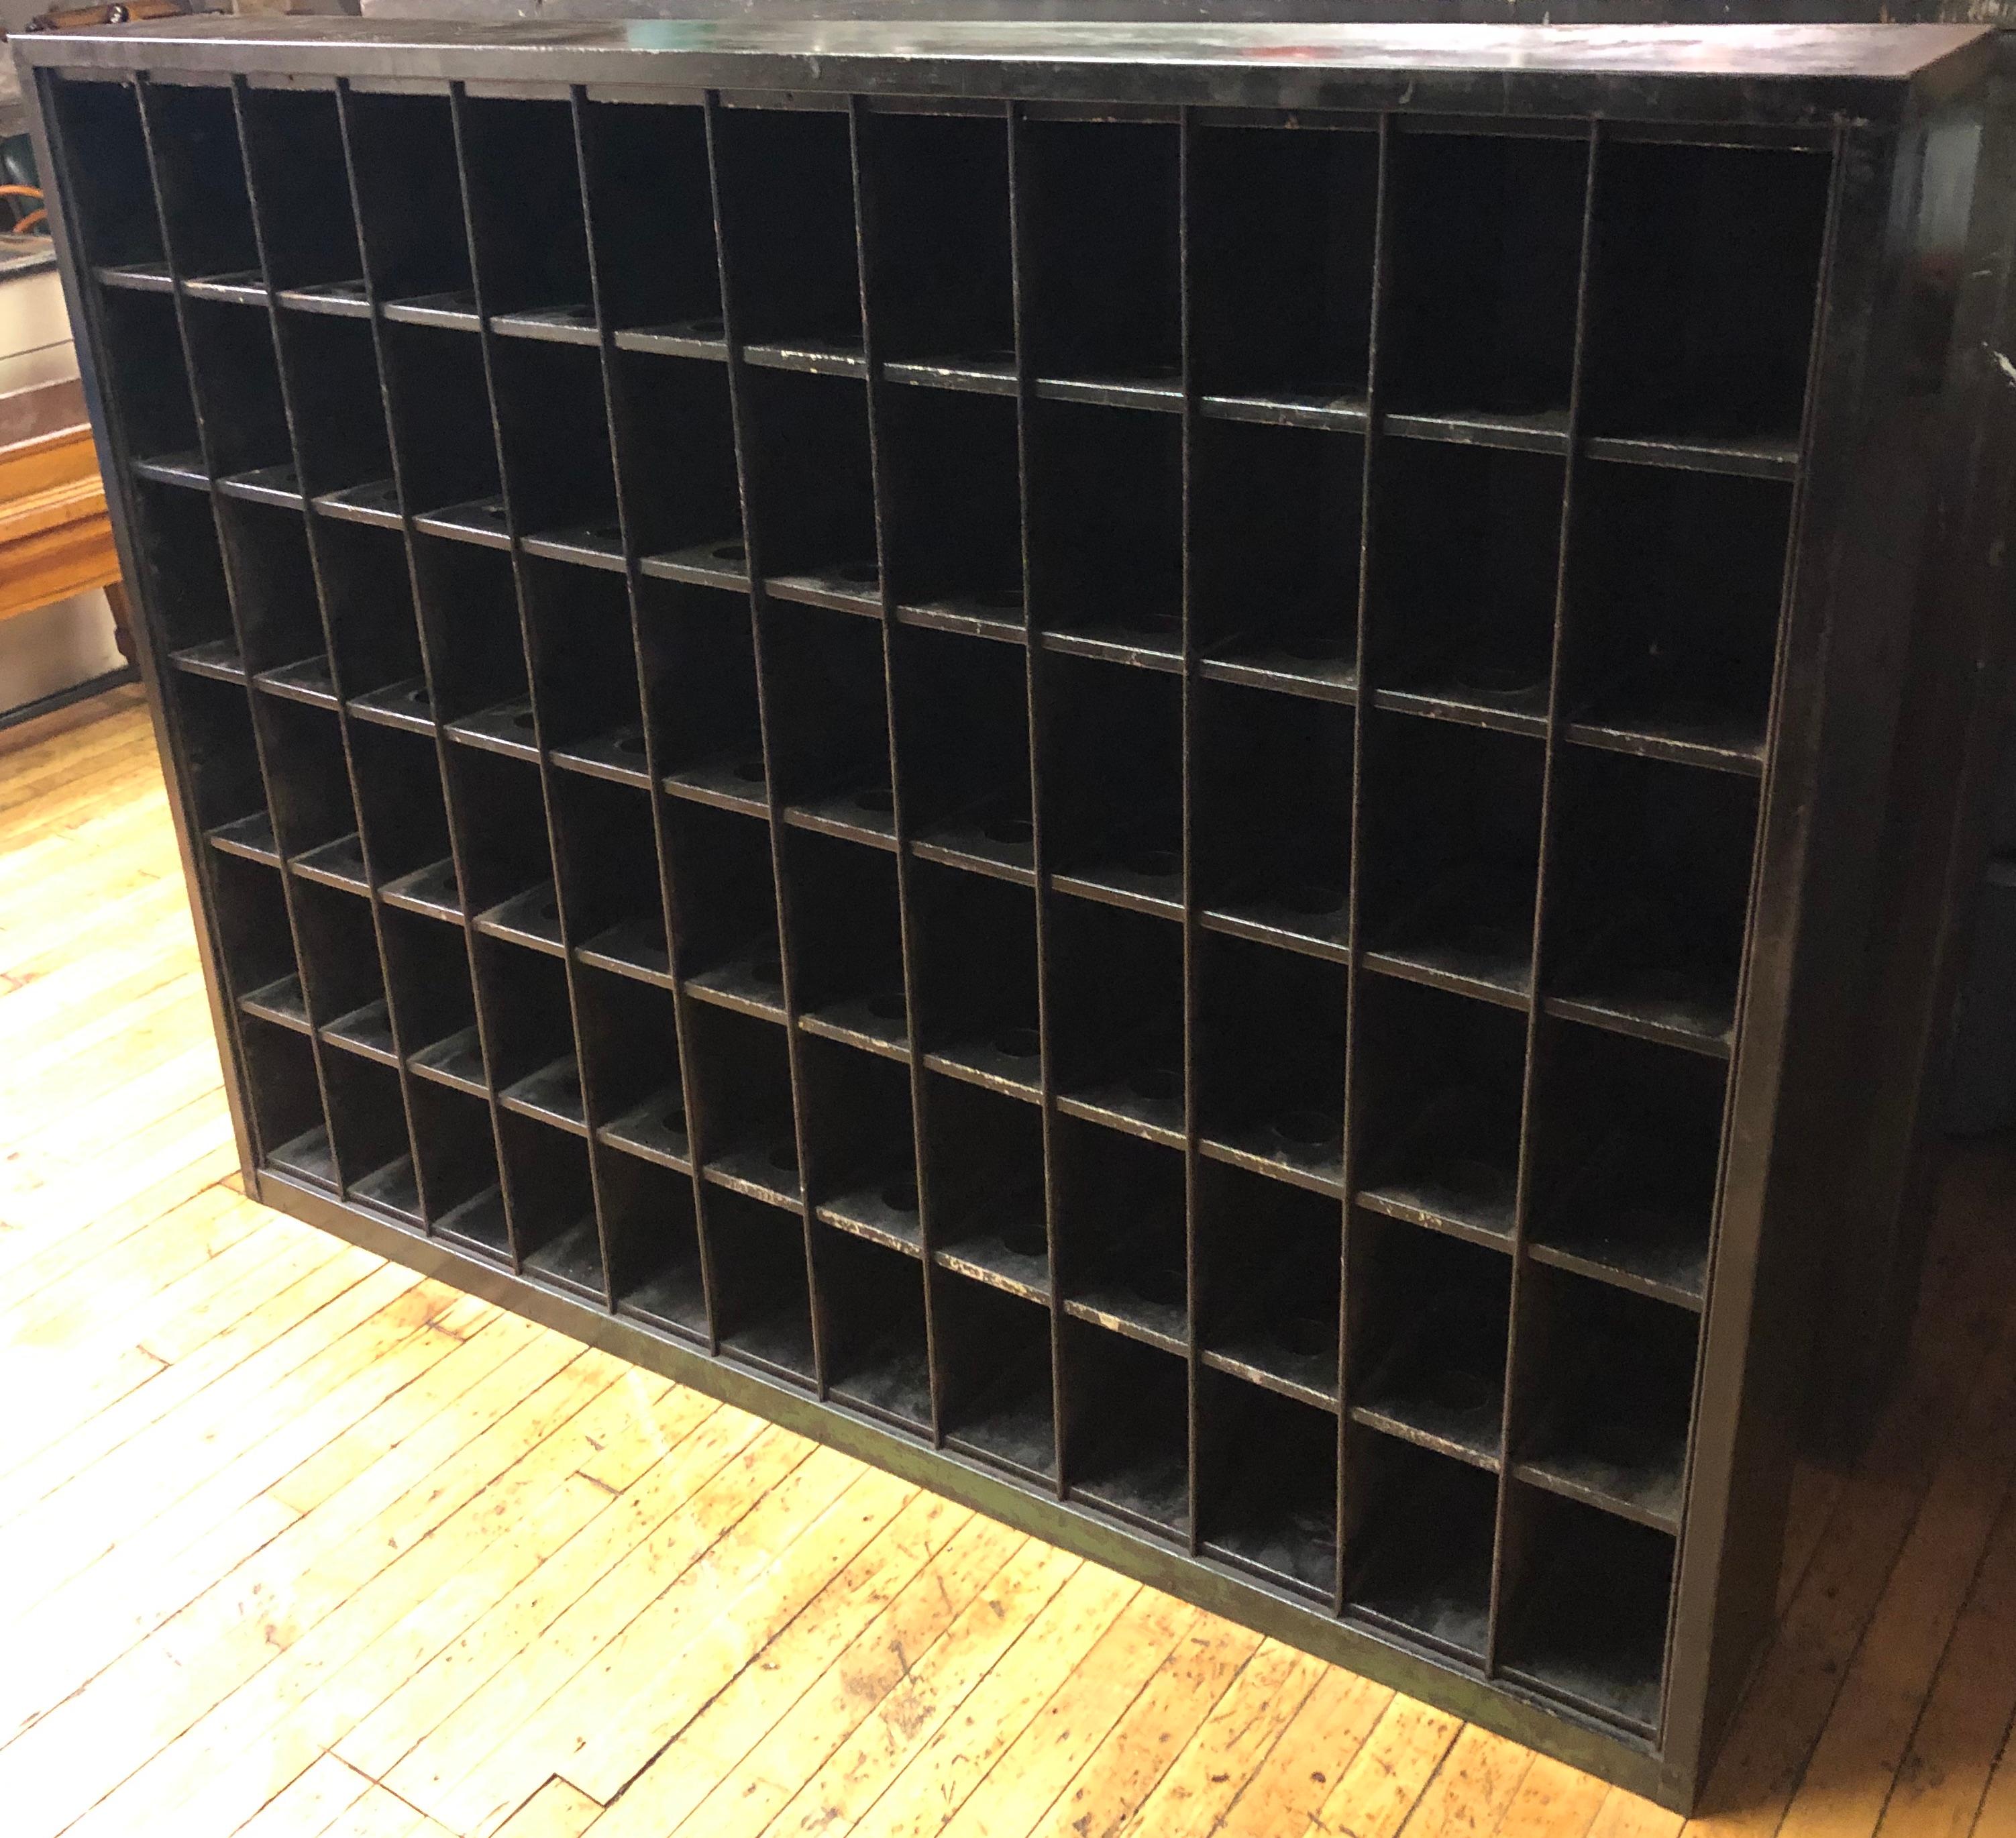 Storage cabinet of painted steel with 72 cubbies. Each measures 5 inches wide x 8 inches deep x 7 inches high. Ideal as a wine rack, DVD/CD storage, small size paperback books and the myriad items of a life's worth of collecting. Guaranteed you will